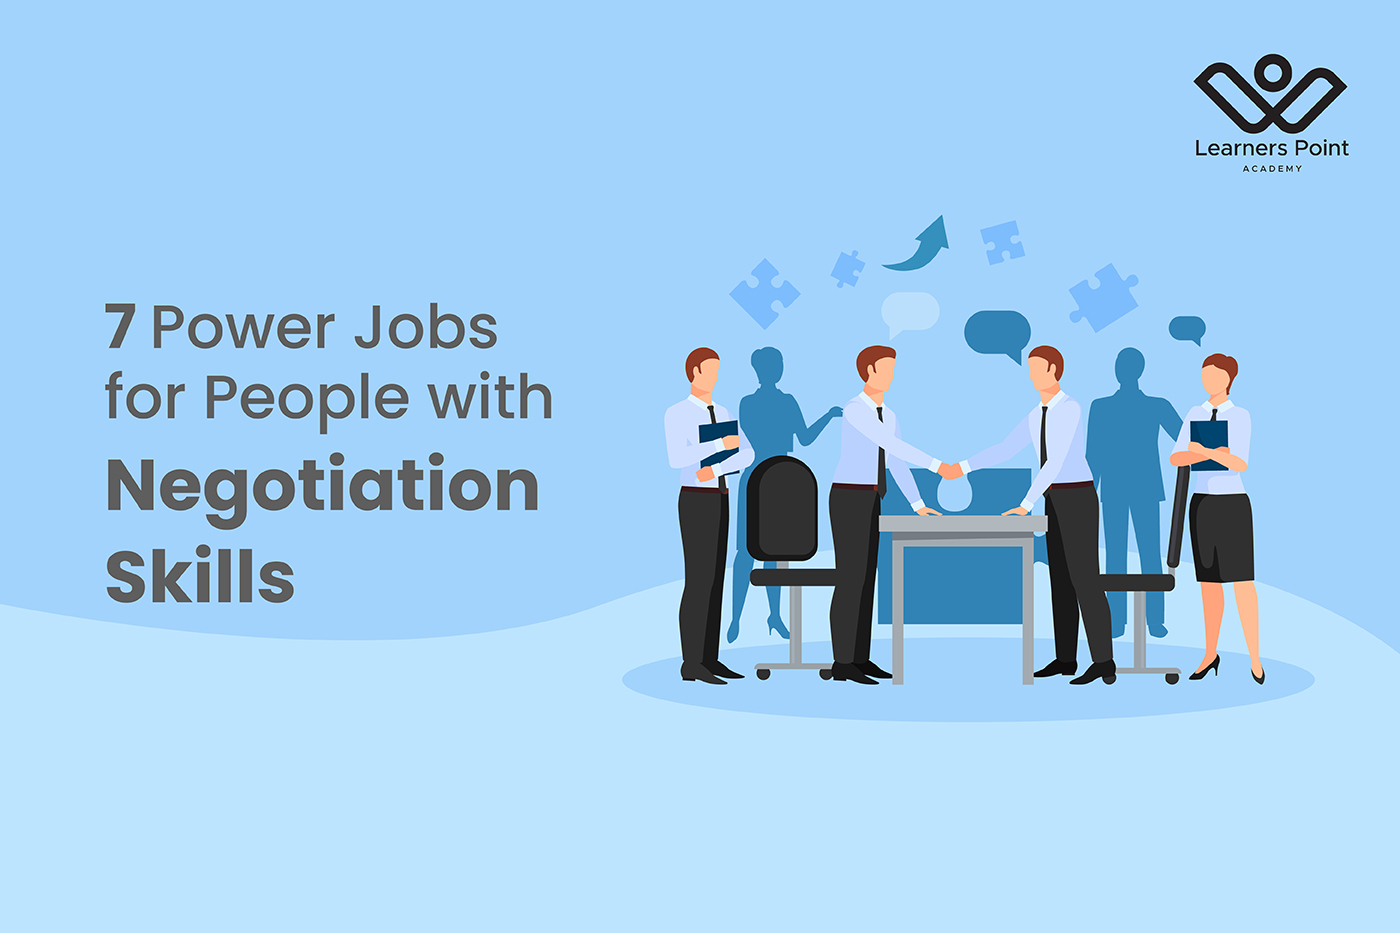 7 Power Jobs for People with Negotiation Skills